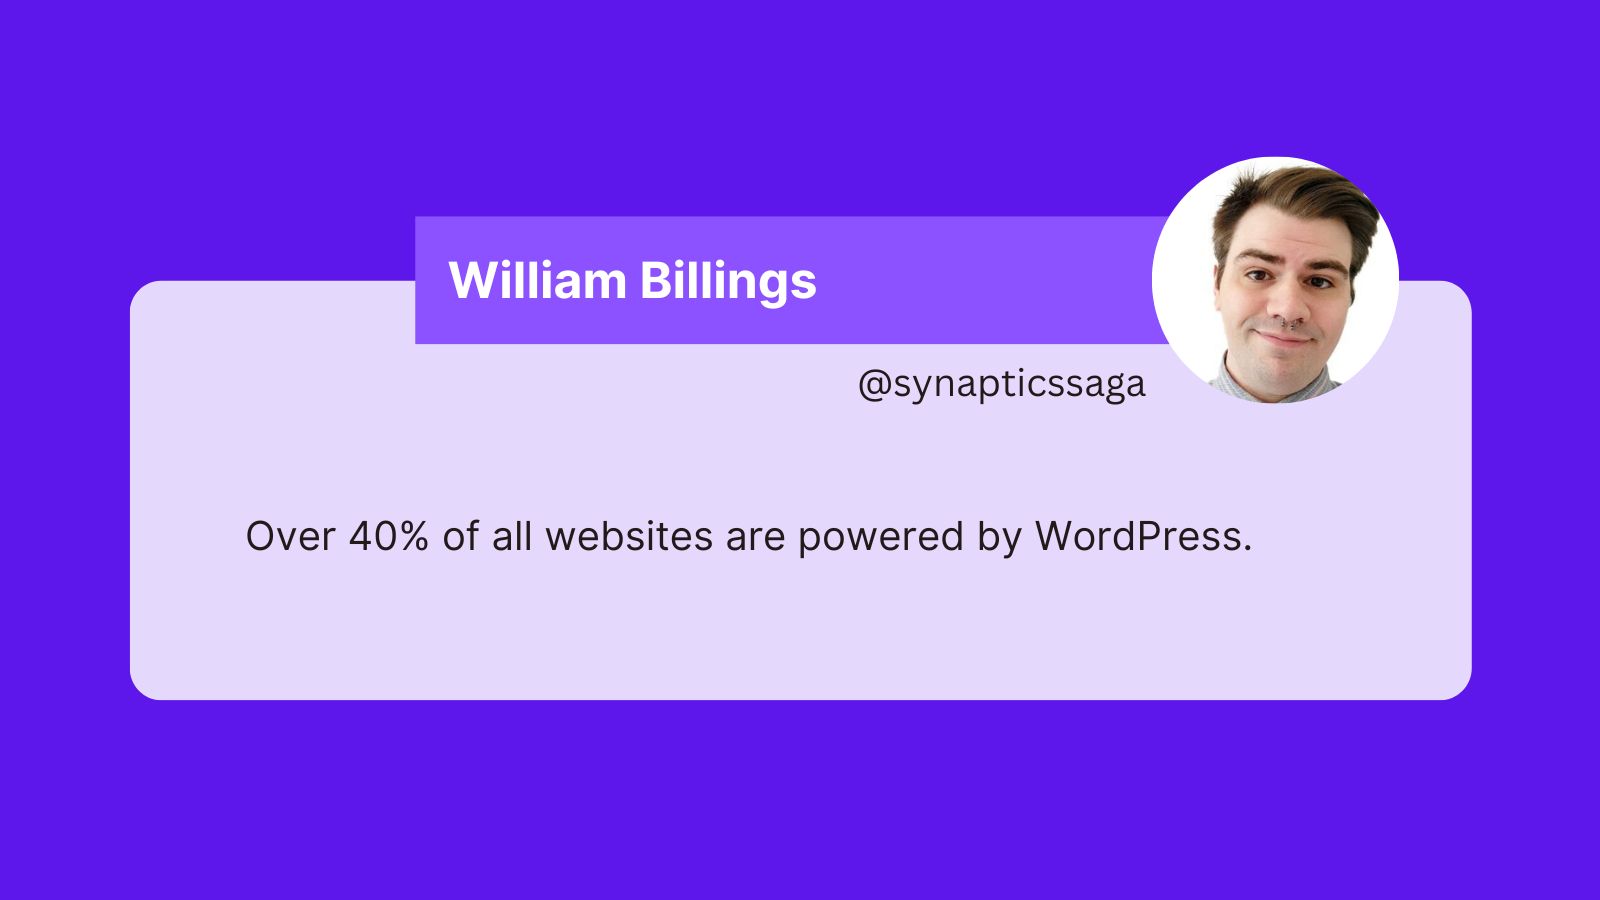 A tweet from William Billings that reads: Over 40% of all websites are powered by WordPress.